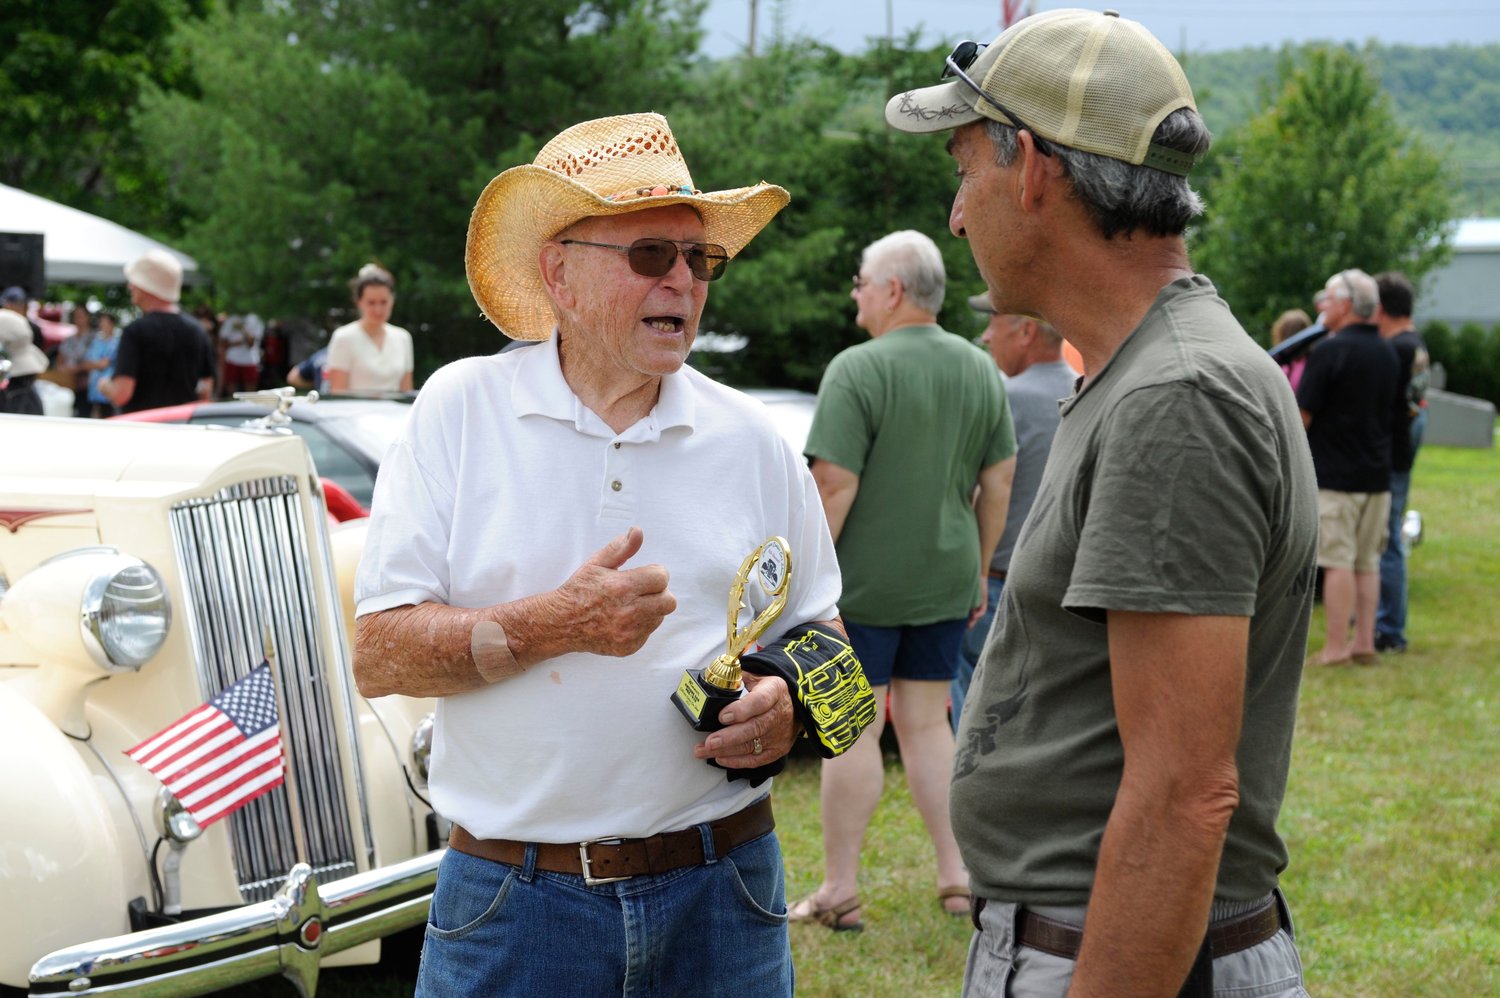 Allan Kehrley talks shop with another vintage car and motorcycle enthusiast moments after receiving an award.